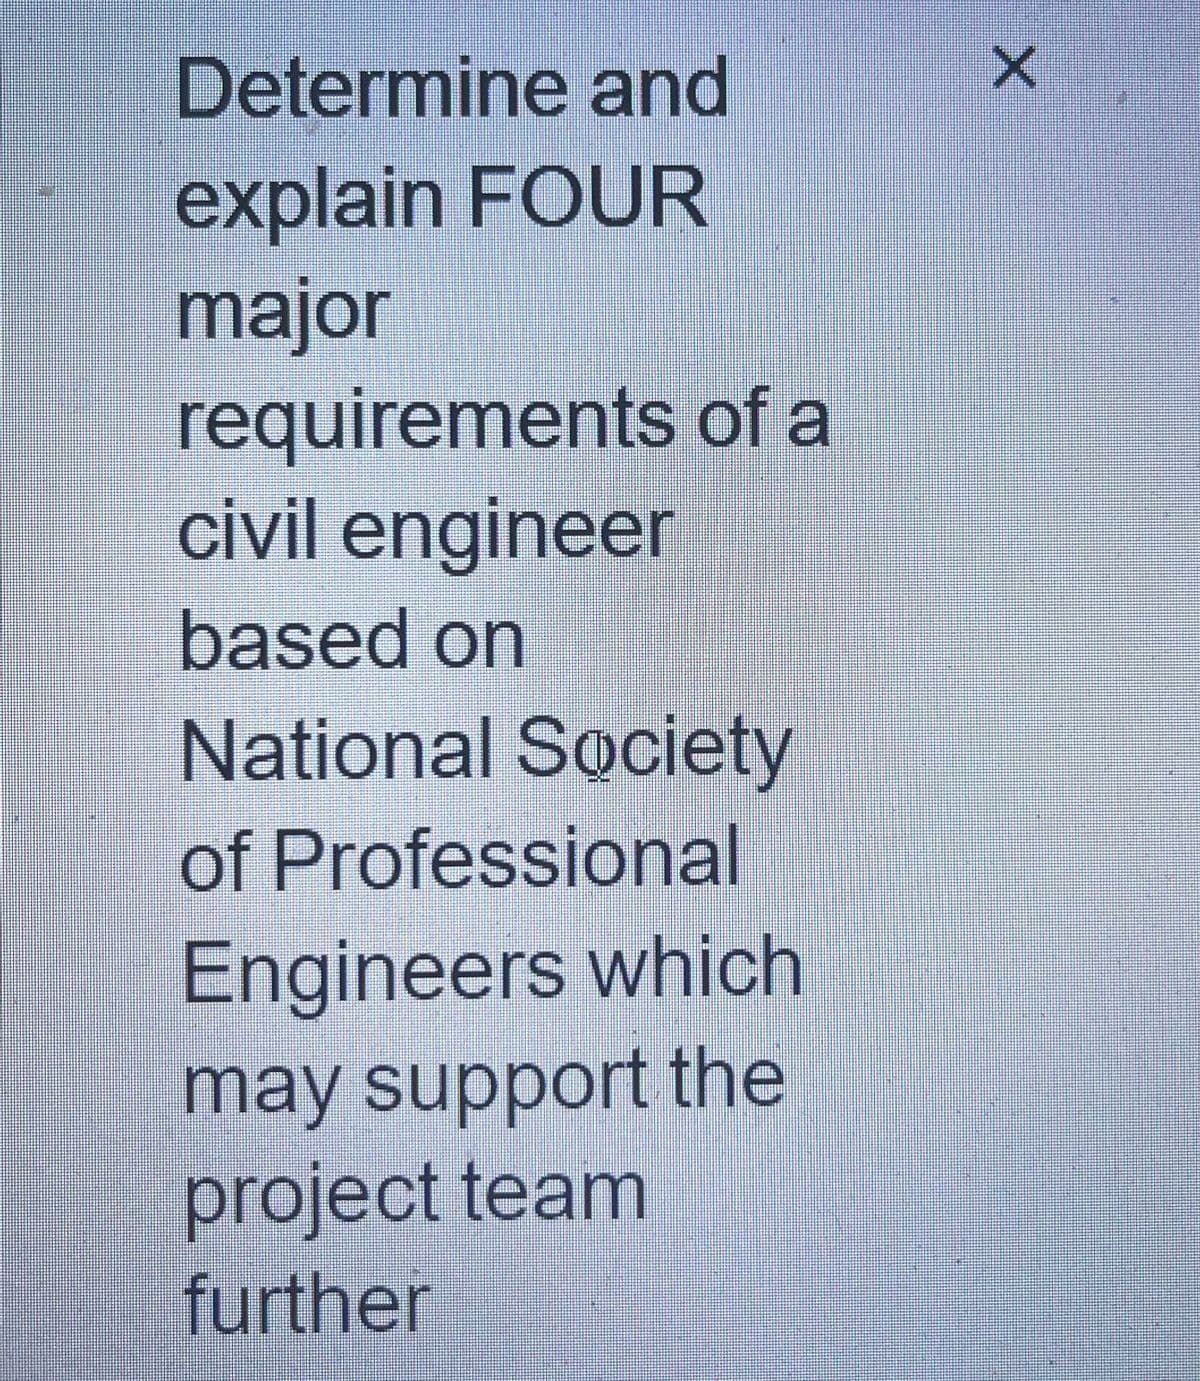 Determine and
explain FOUR
major
requirements of a
civil engineer
based on
National Society
of Professional
Engineers which
may support the
project team
further
